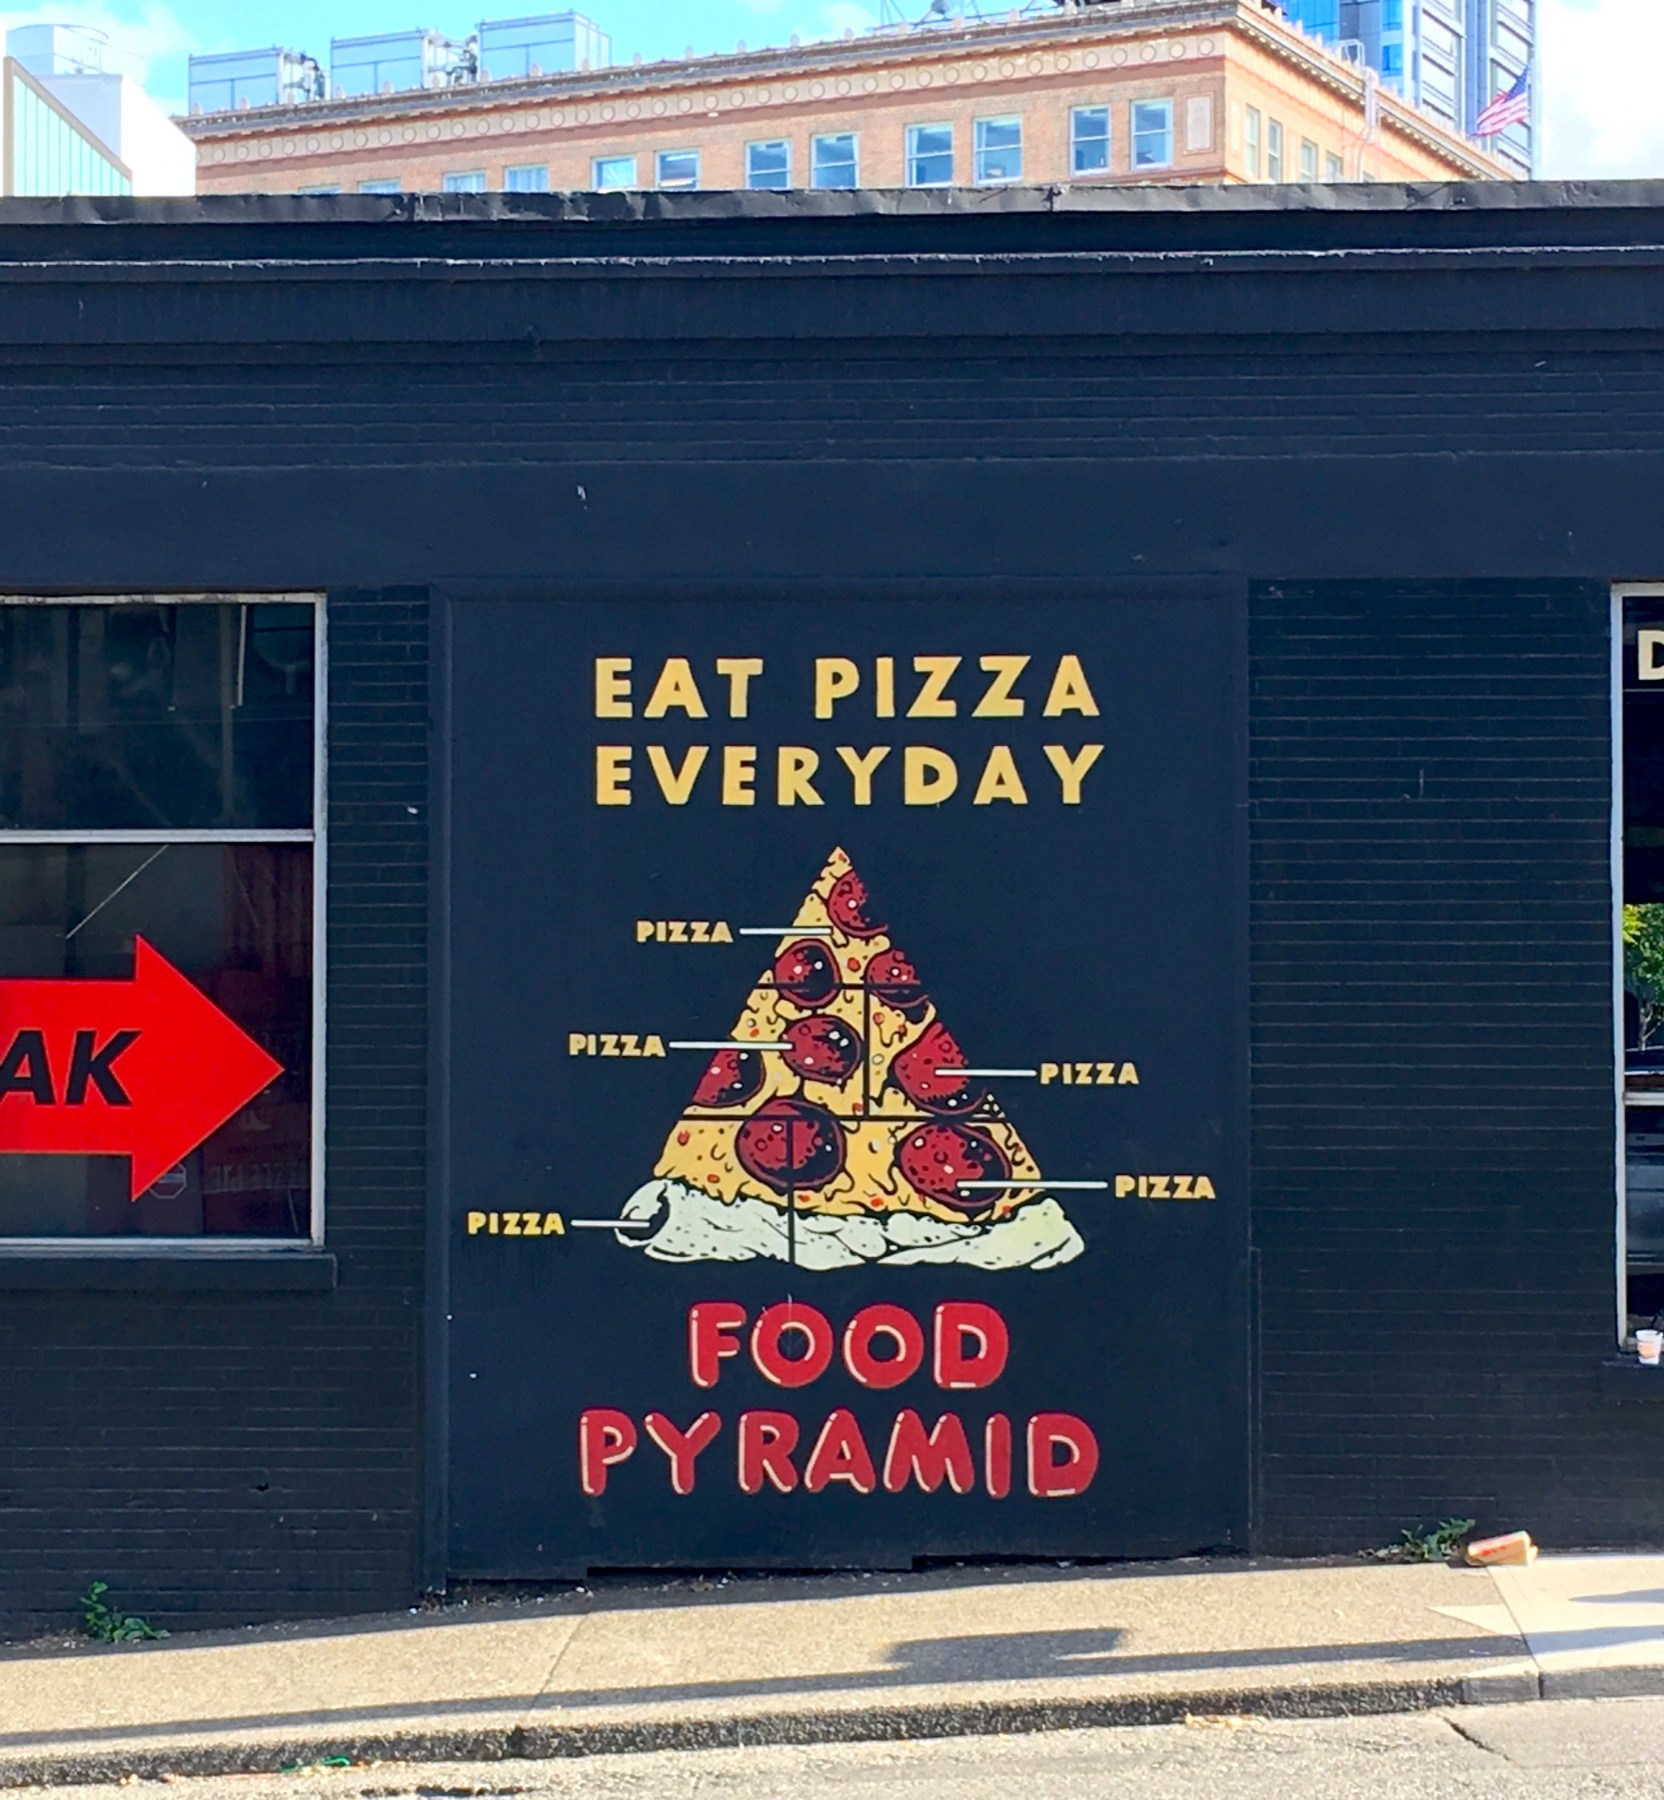 Portland is a very health-conscious city so they insist on painting useful nutrition advice all over the place.